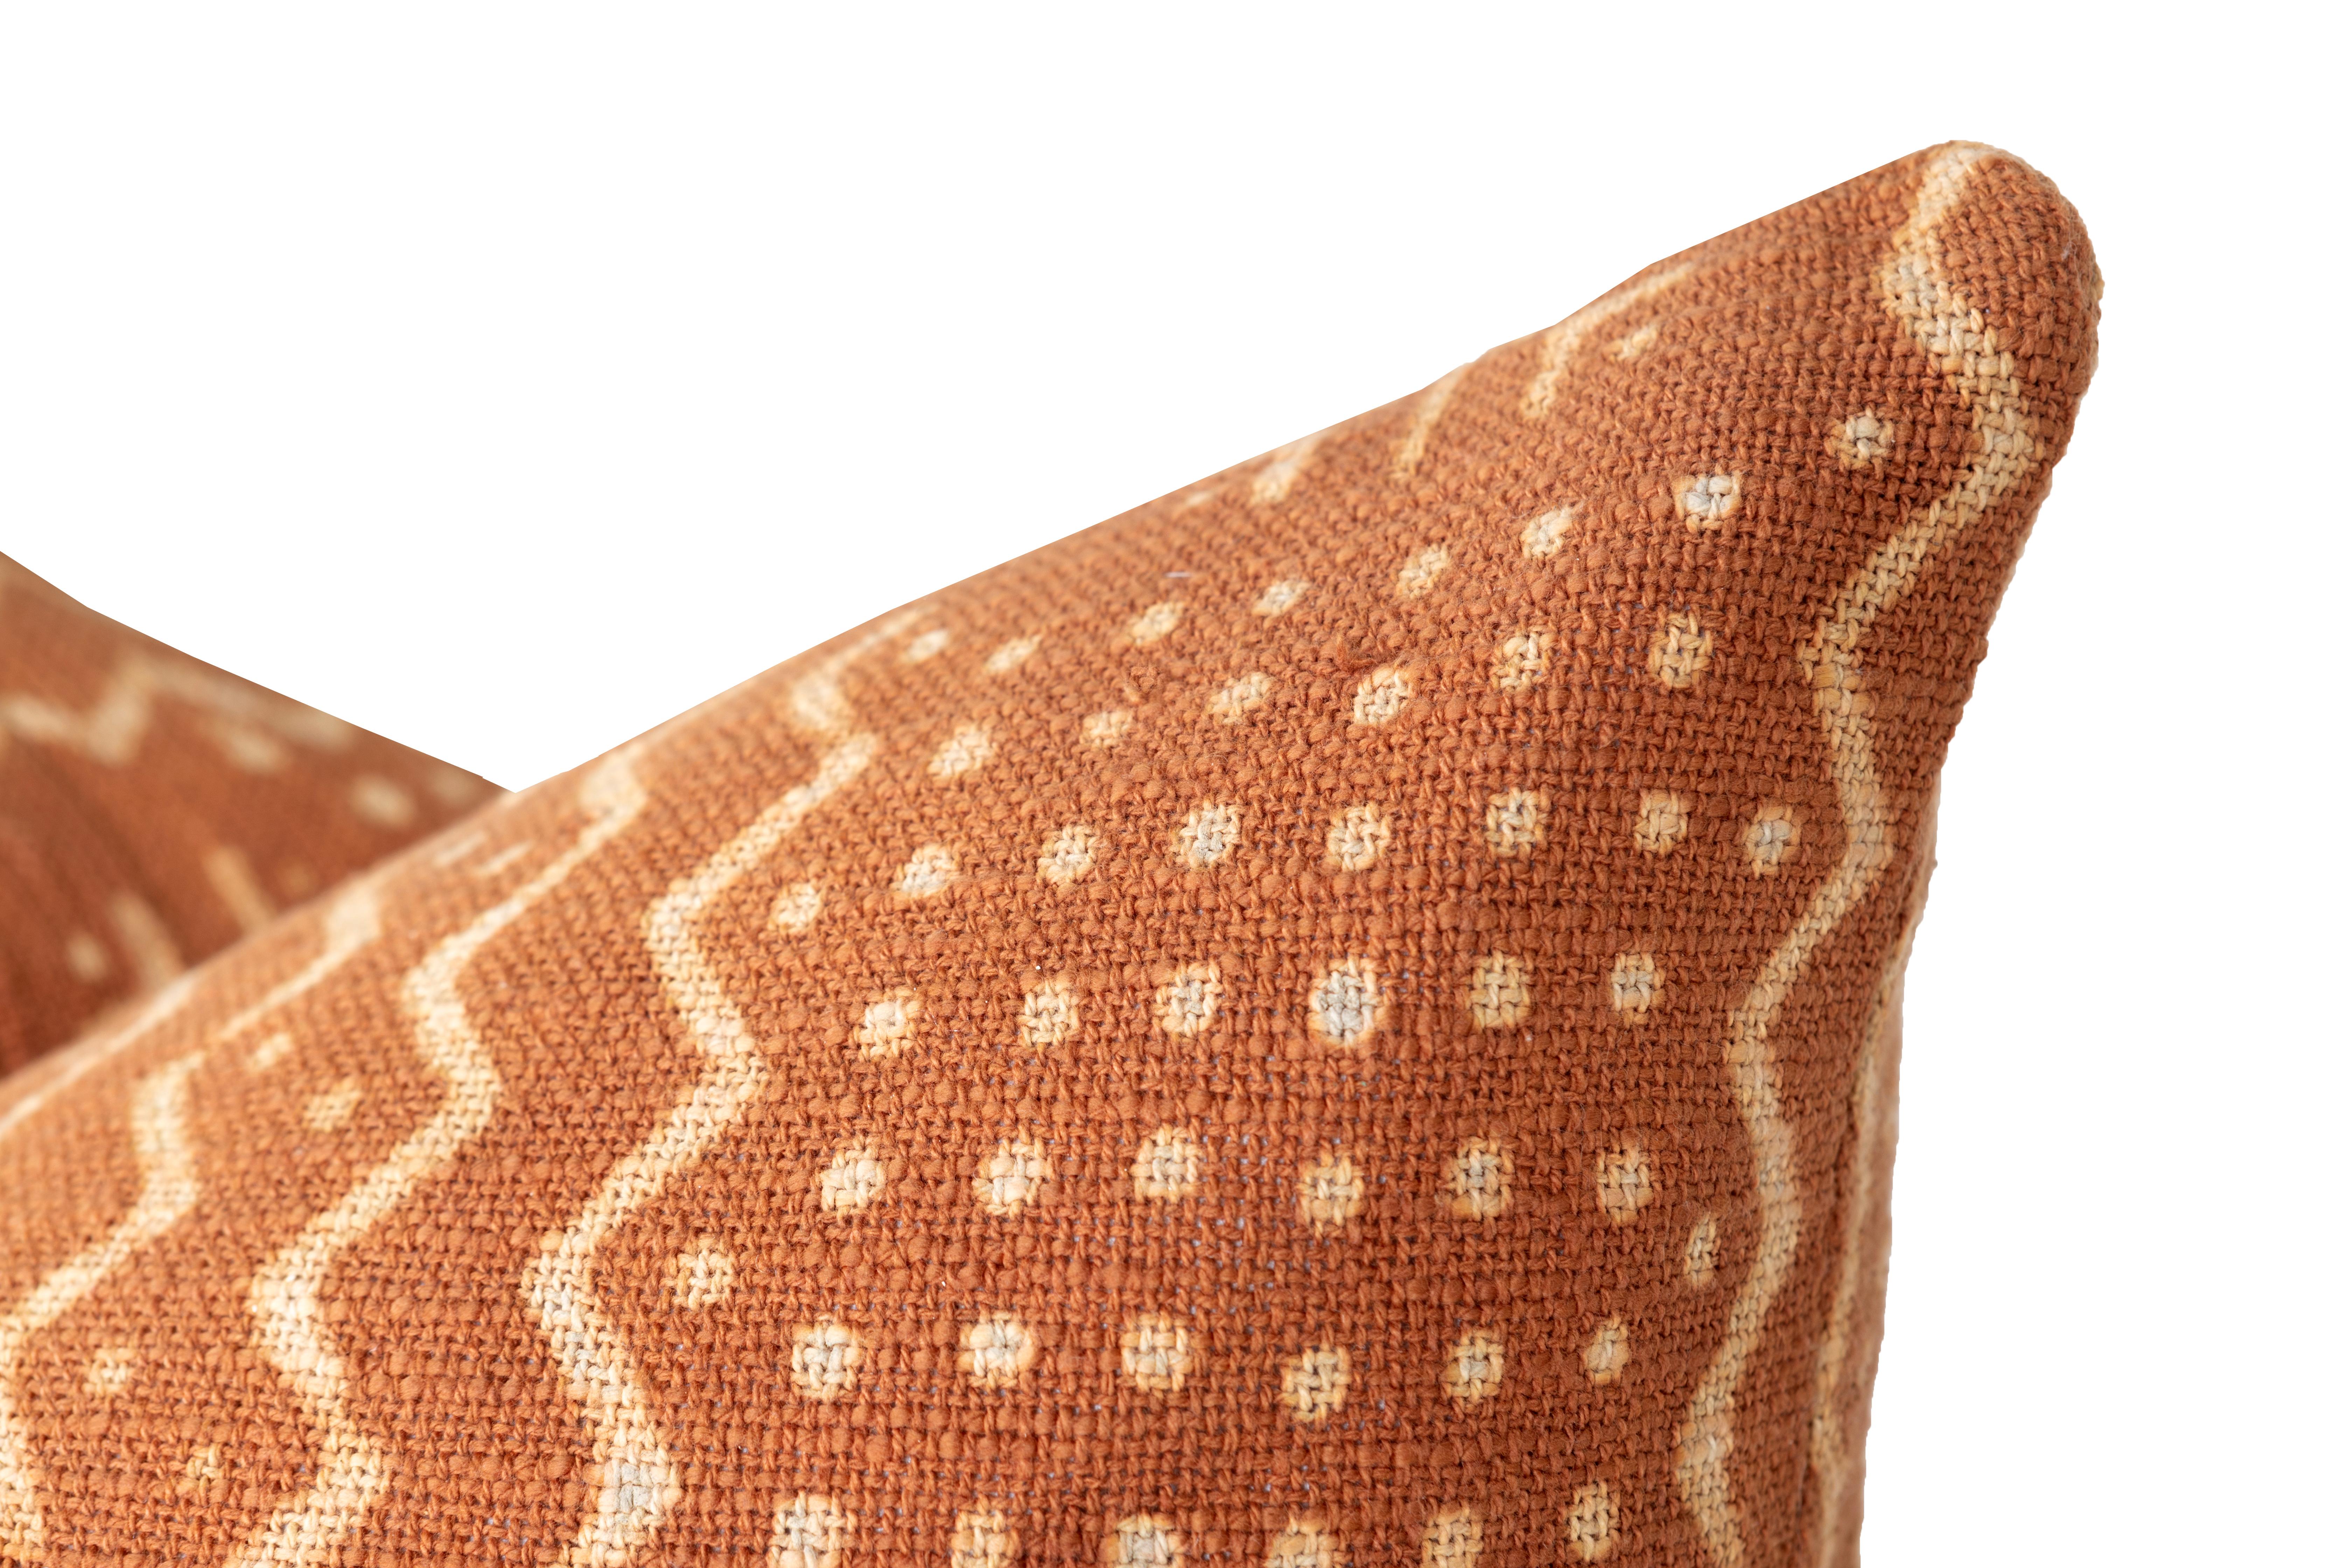 Frameworks, Rust Mod Cloth Woven Pillow In New Condition For Sale In Dallas, TX